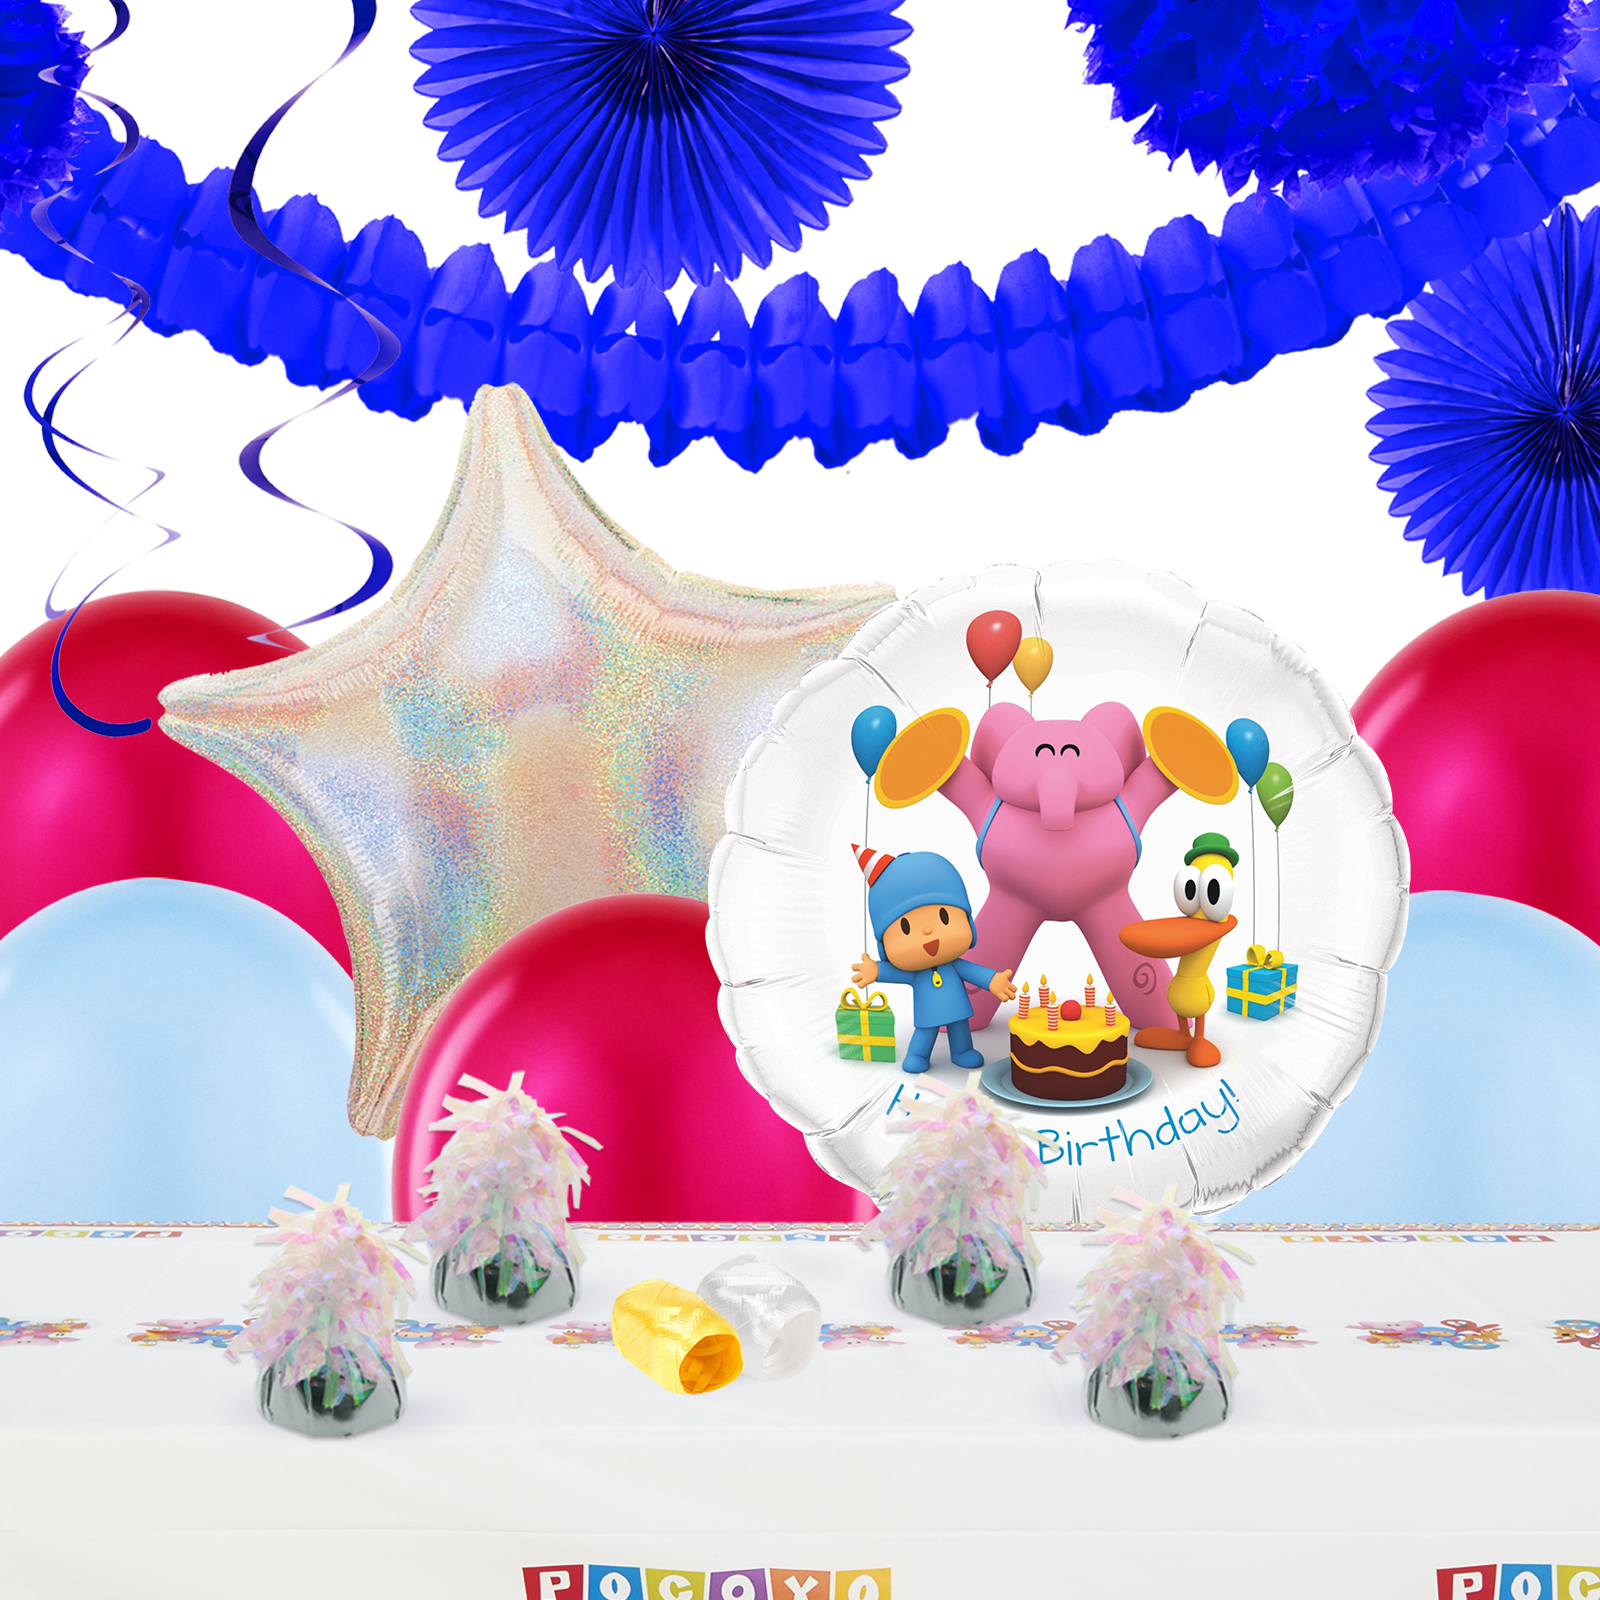 Pocoyo Childrens Birthday Party Supplies Decoration Pack